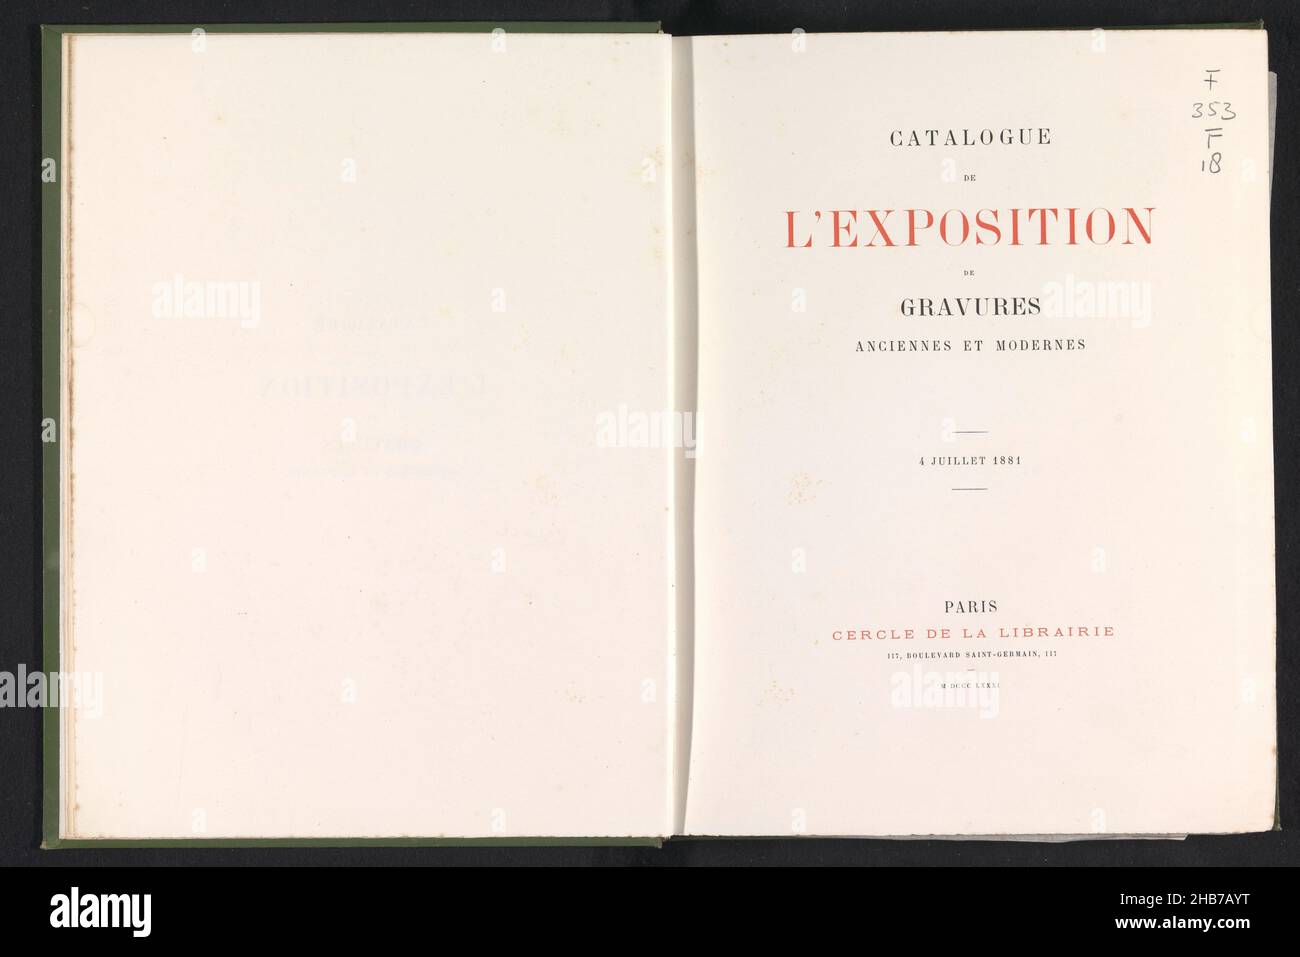 Catalogue de l'exposition de gravures anciennes et modernes, publisher: Cercle de la librairie, (mentioned on object), Paris, 1881, cardboard, paper, printing, collotype, engraving, collotype, height 330 mm × width 261 mm × thickness 40 mm Stock Photo